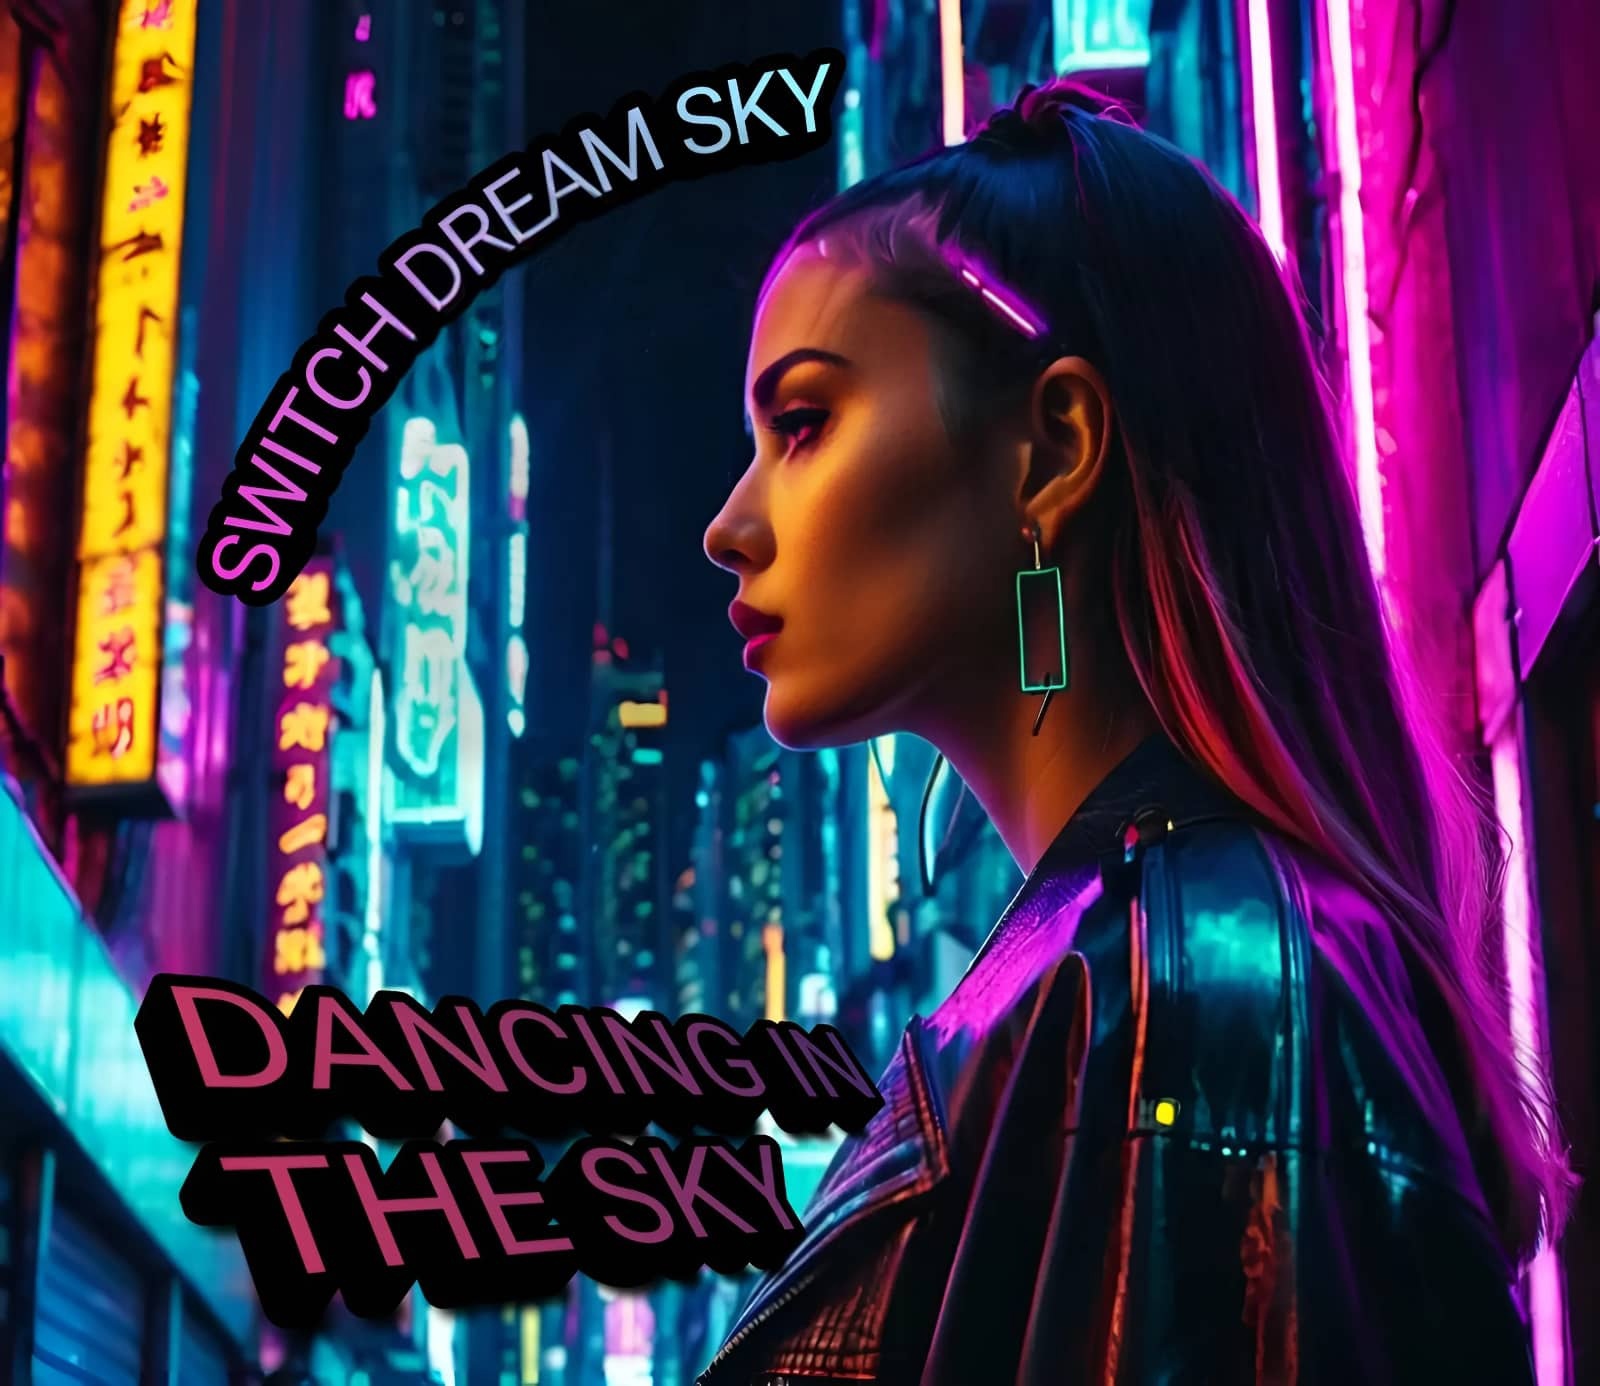 Switch Dream Sky — Dancing In The Sky cover artwork